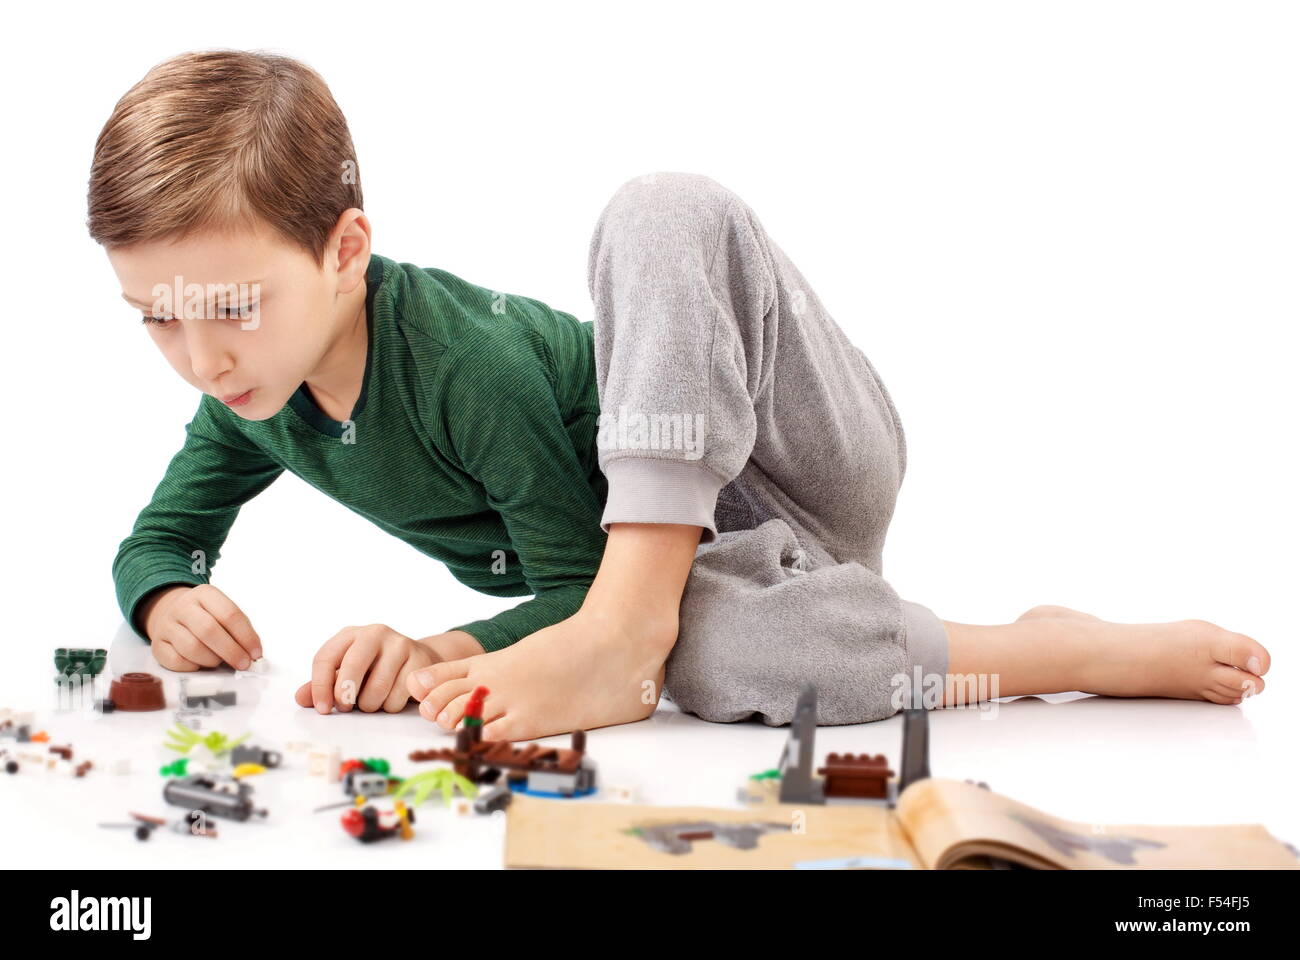 Handsome guy who is playing and building something from book Stock Photo